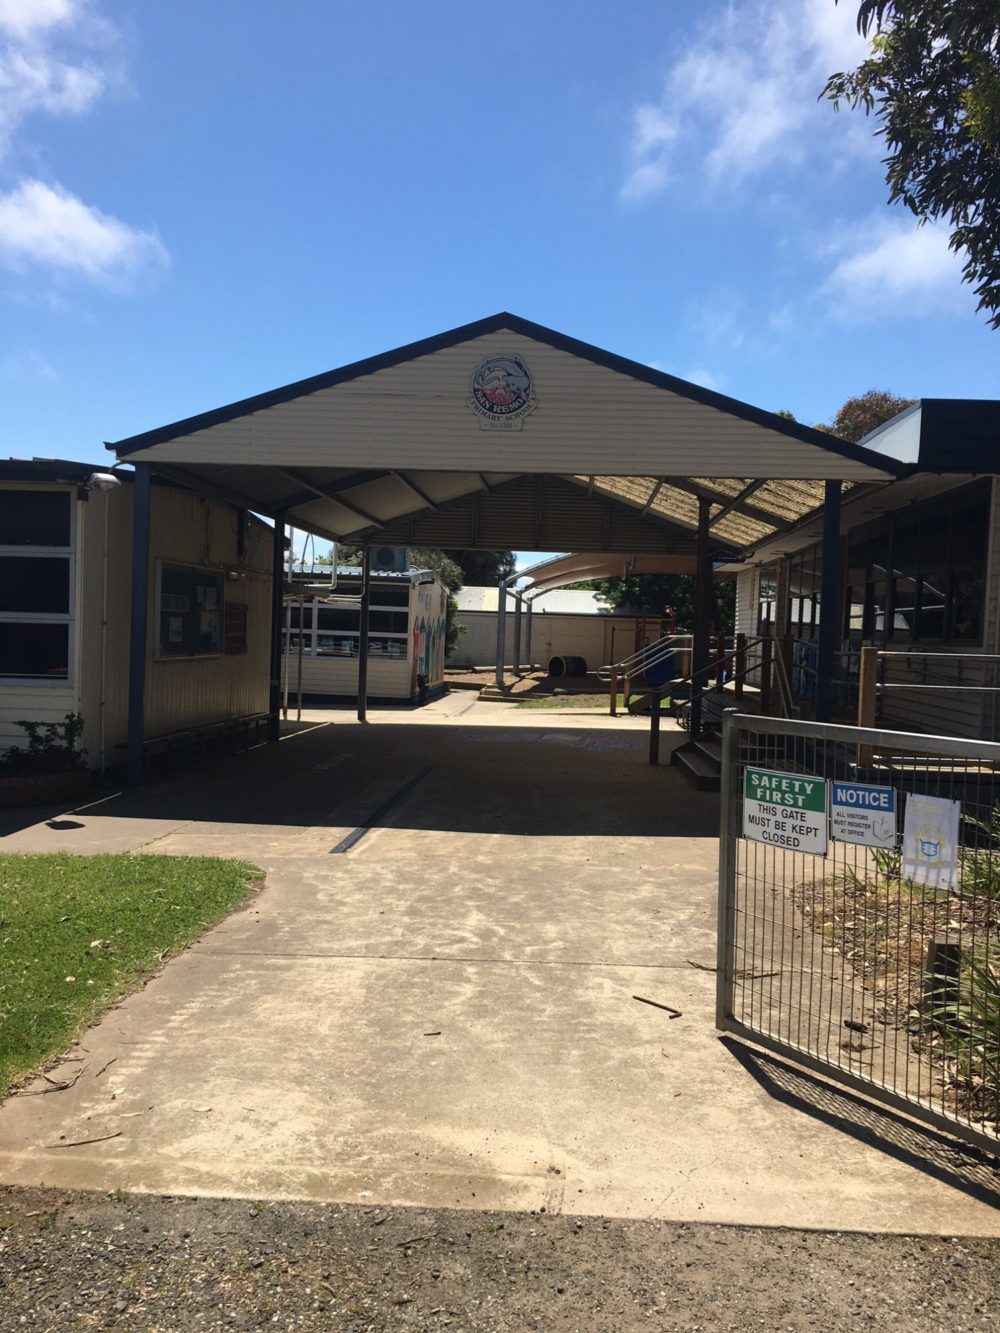 San Remo Primary School earned excellence in education